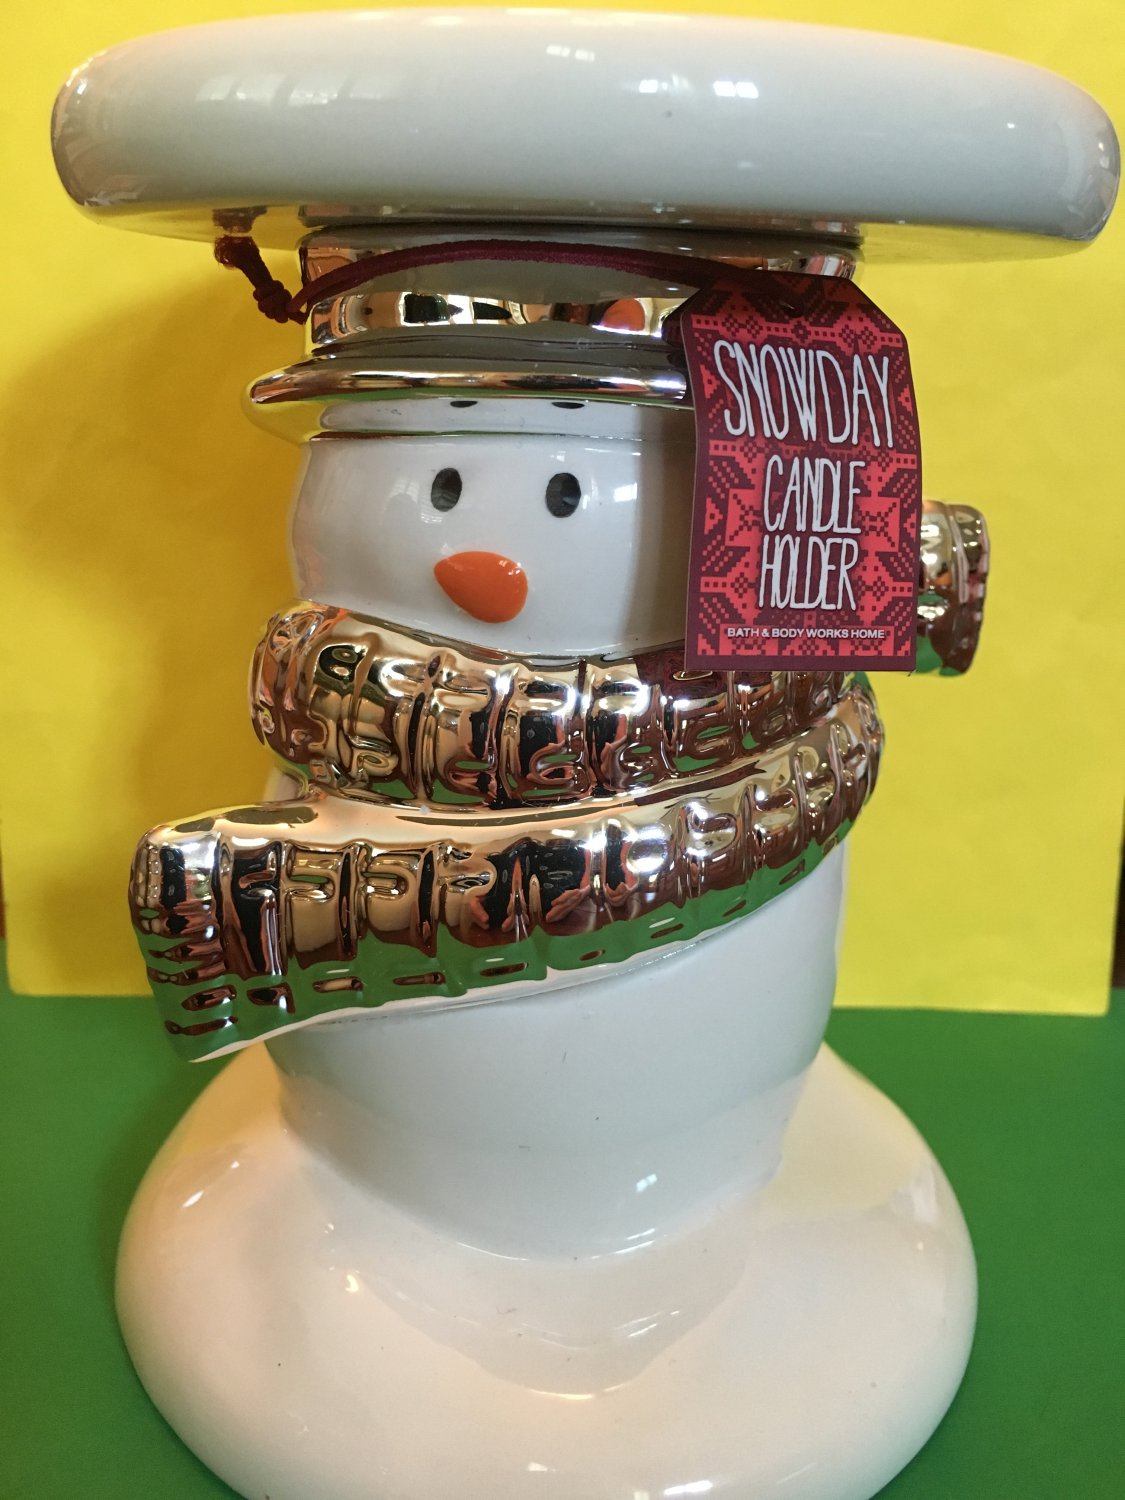 NEW BATH & BODY WORKS CERAMIC SNOWMAN PEDESTAL LARGE 3 WICK CANDLE HOLDER STAND 